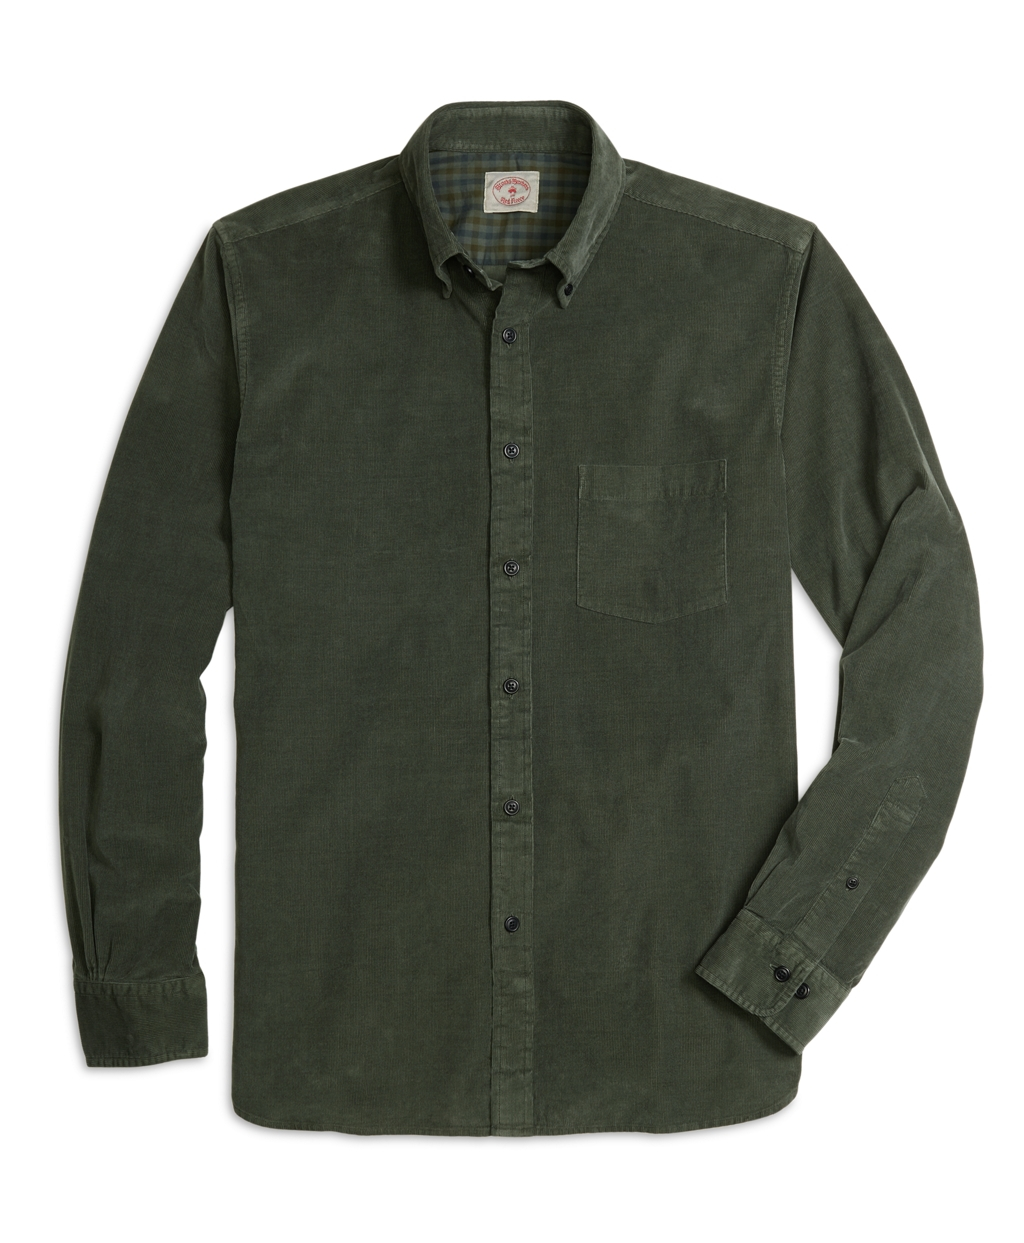 Brooks Brothers Pinwale Corduroy Shirt in Green for Men - Lyst